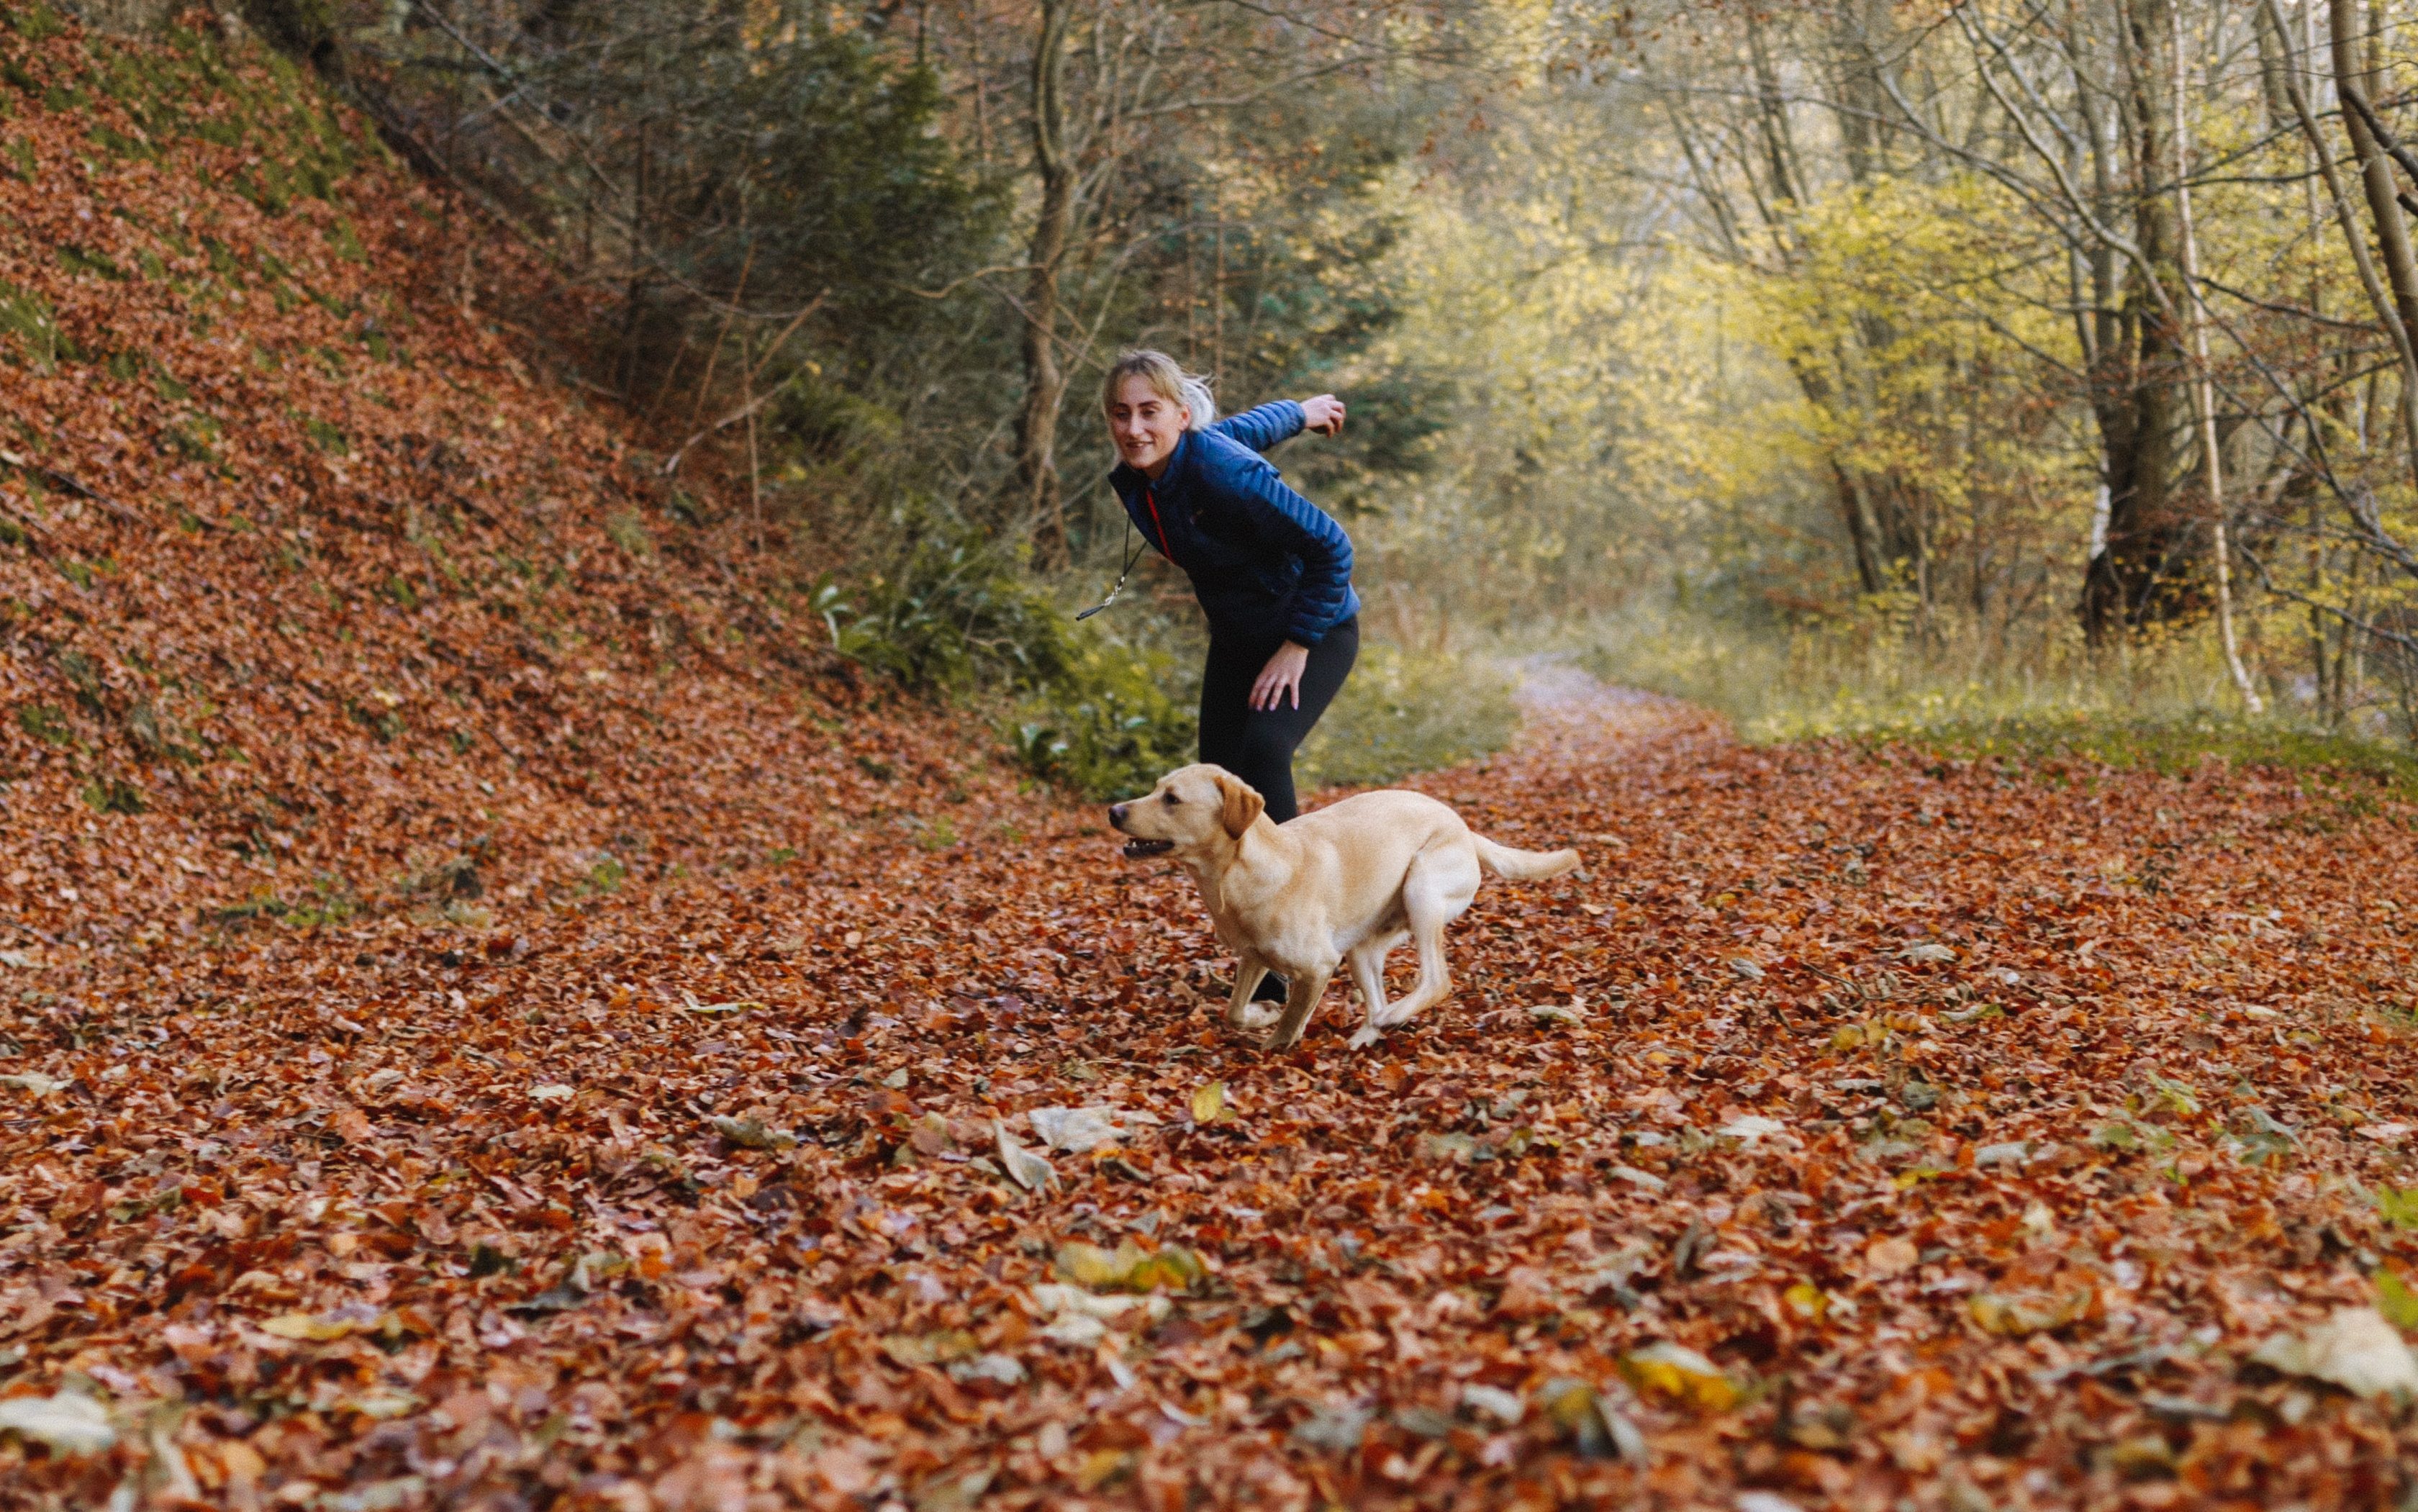 dog and female owner in leaf filled forest. Owner is getting ready to throw ball